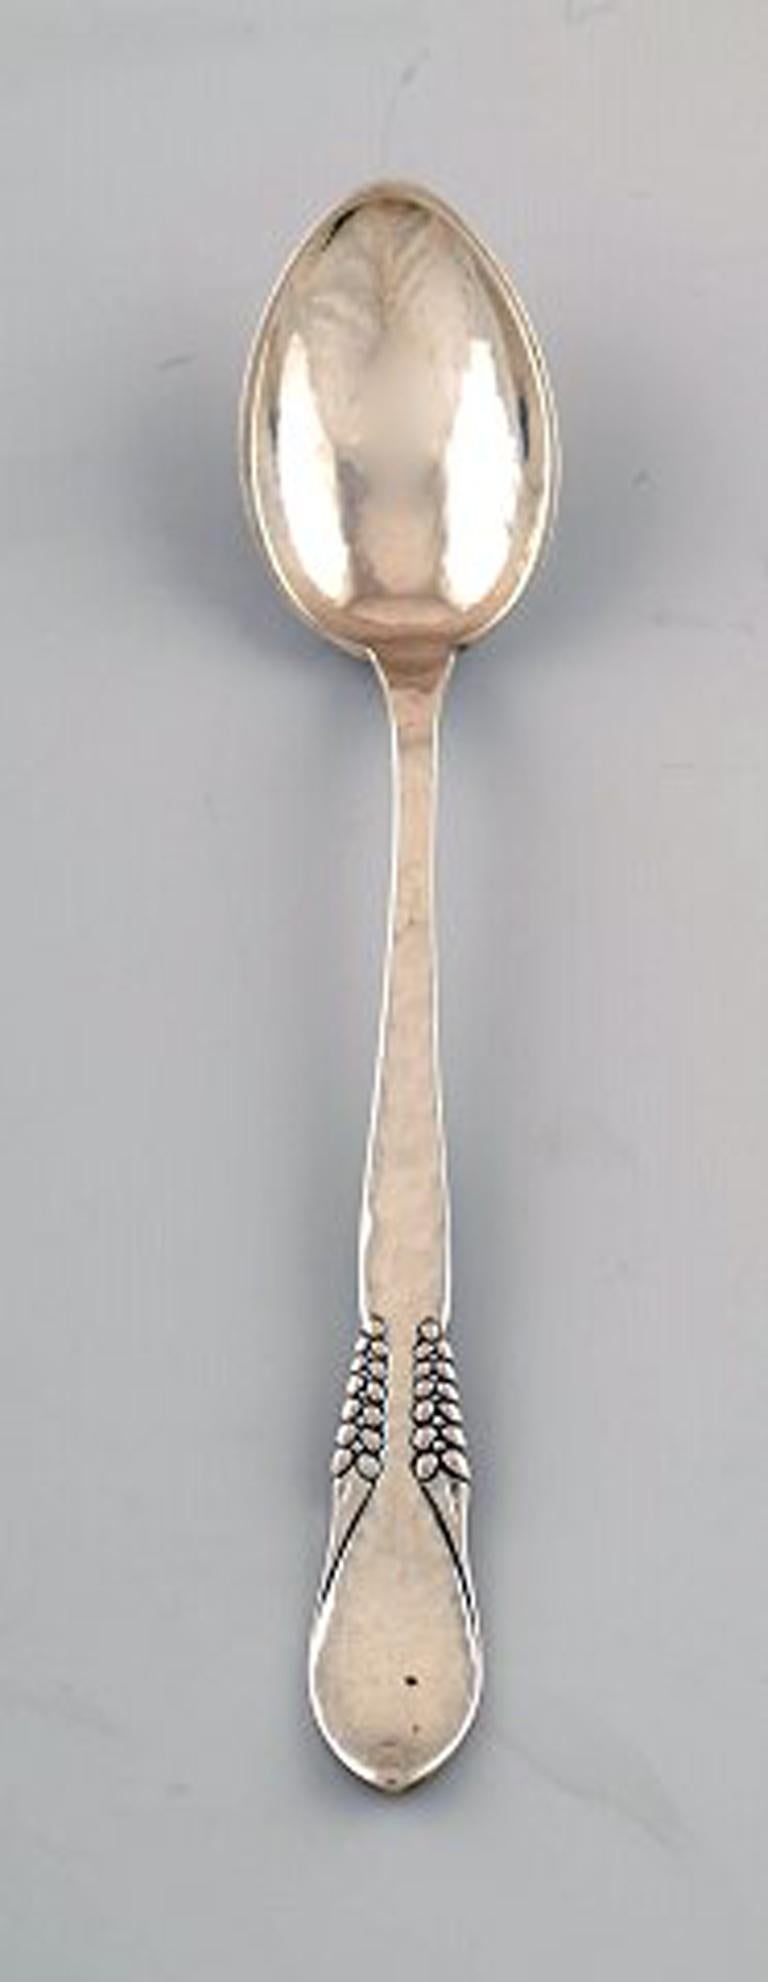 Danish silver 0,830, Five teaspoons.
Stamped: CFH: Christian Fr. Heise. 1910s-1920s.
In very good condition.
Measures: 11 cm.